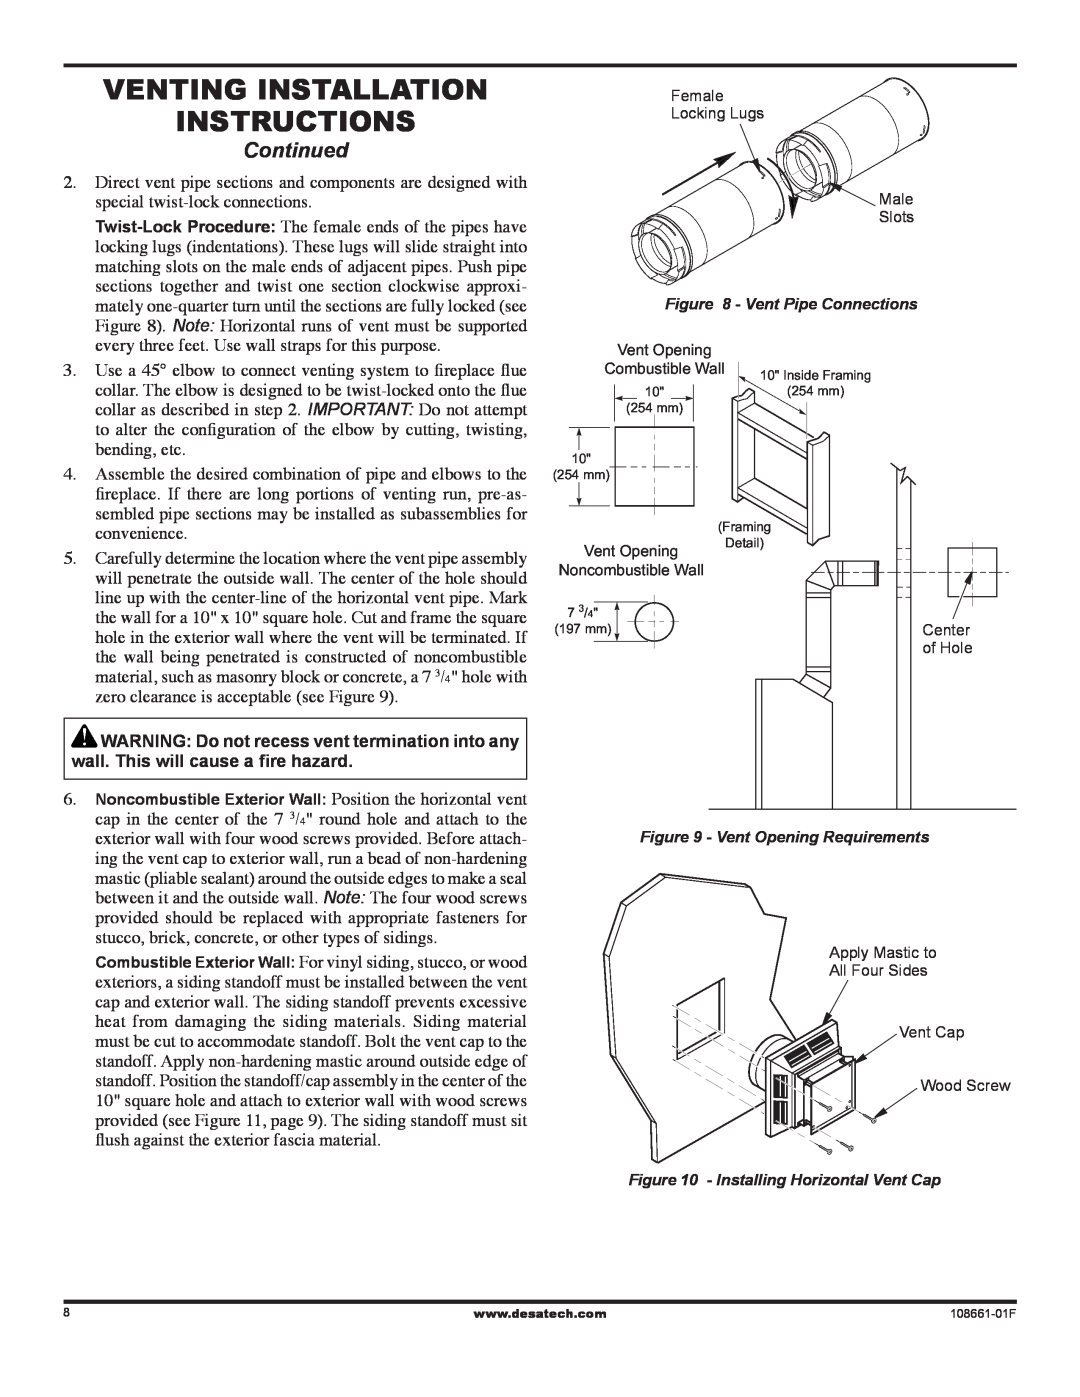 Desa CHDV32NR, (V)T32P Venting Installation instructions, Continued, Vent Pipe Connections, Vent Opening Requirements 